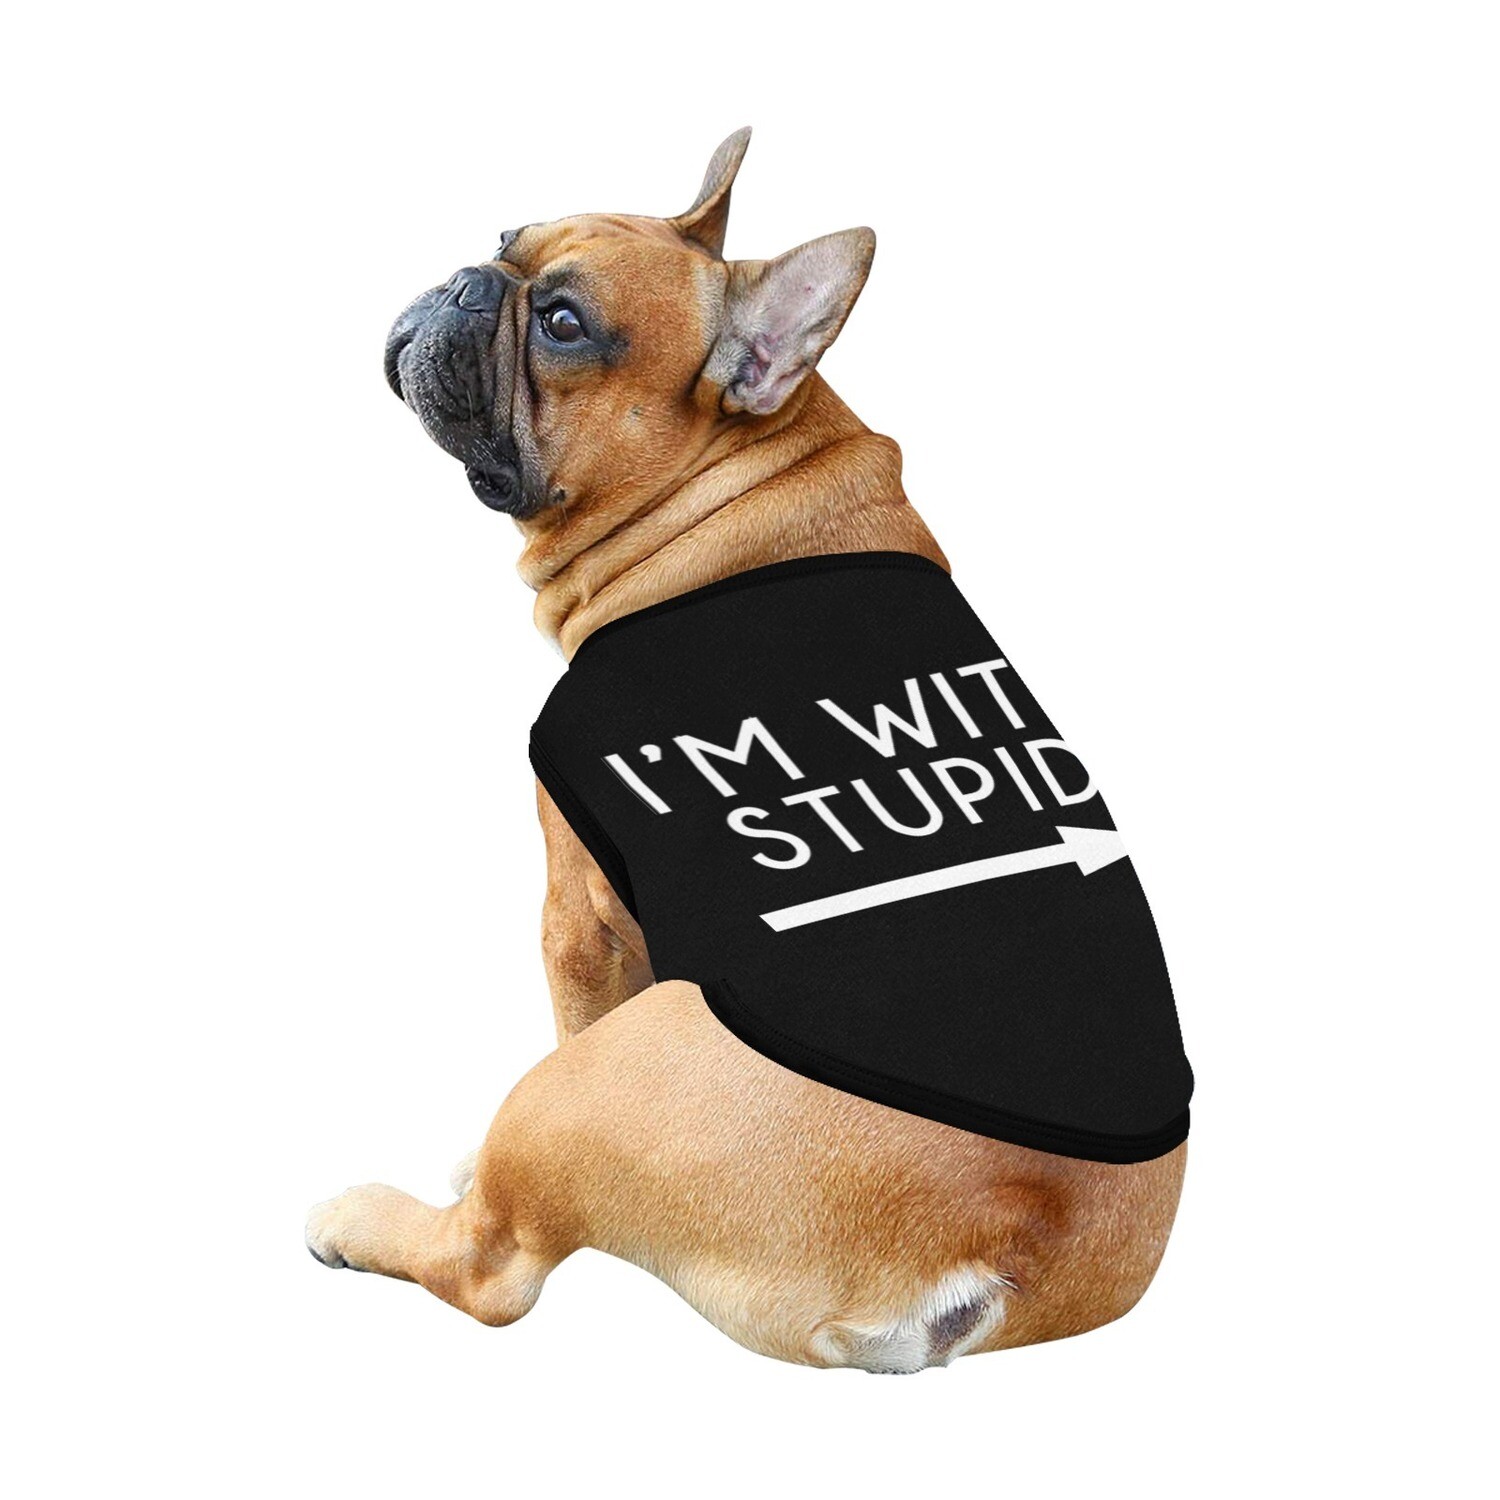 🐕 Patrick Brewer I'm with stupid Dog t-shirt, Dog Tank Top, Dog shirt, Dog clothes, Gifts, front back print, 7 sizes XS to 3XL, Schitt's Creek, TV series, ultimate gray